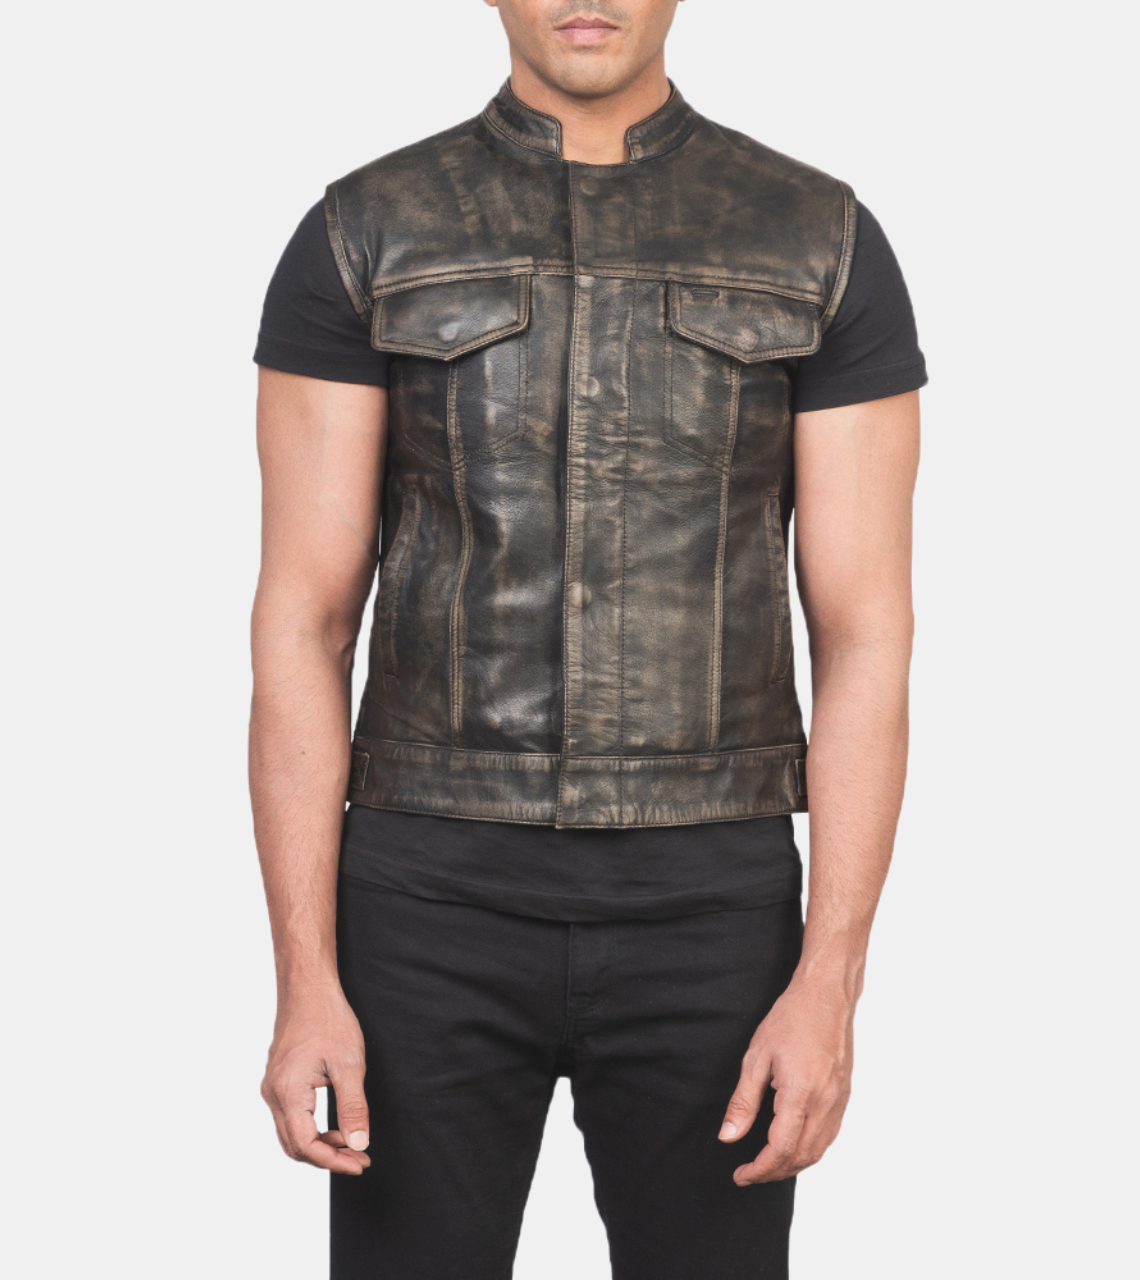 Caelyn Men's Brown Distressed Leather Vest